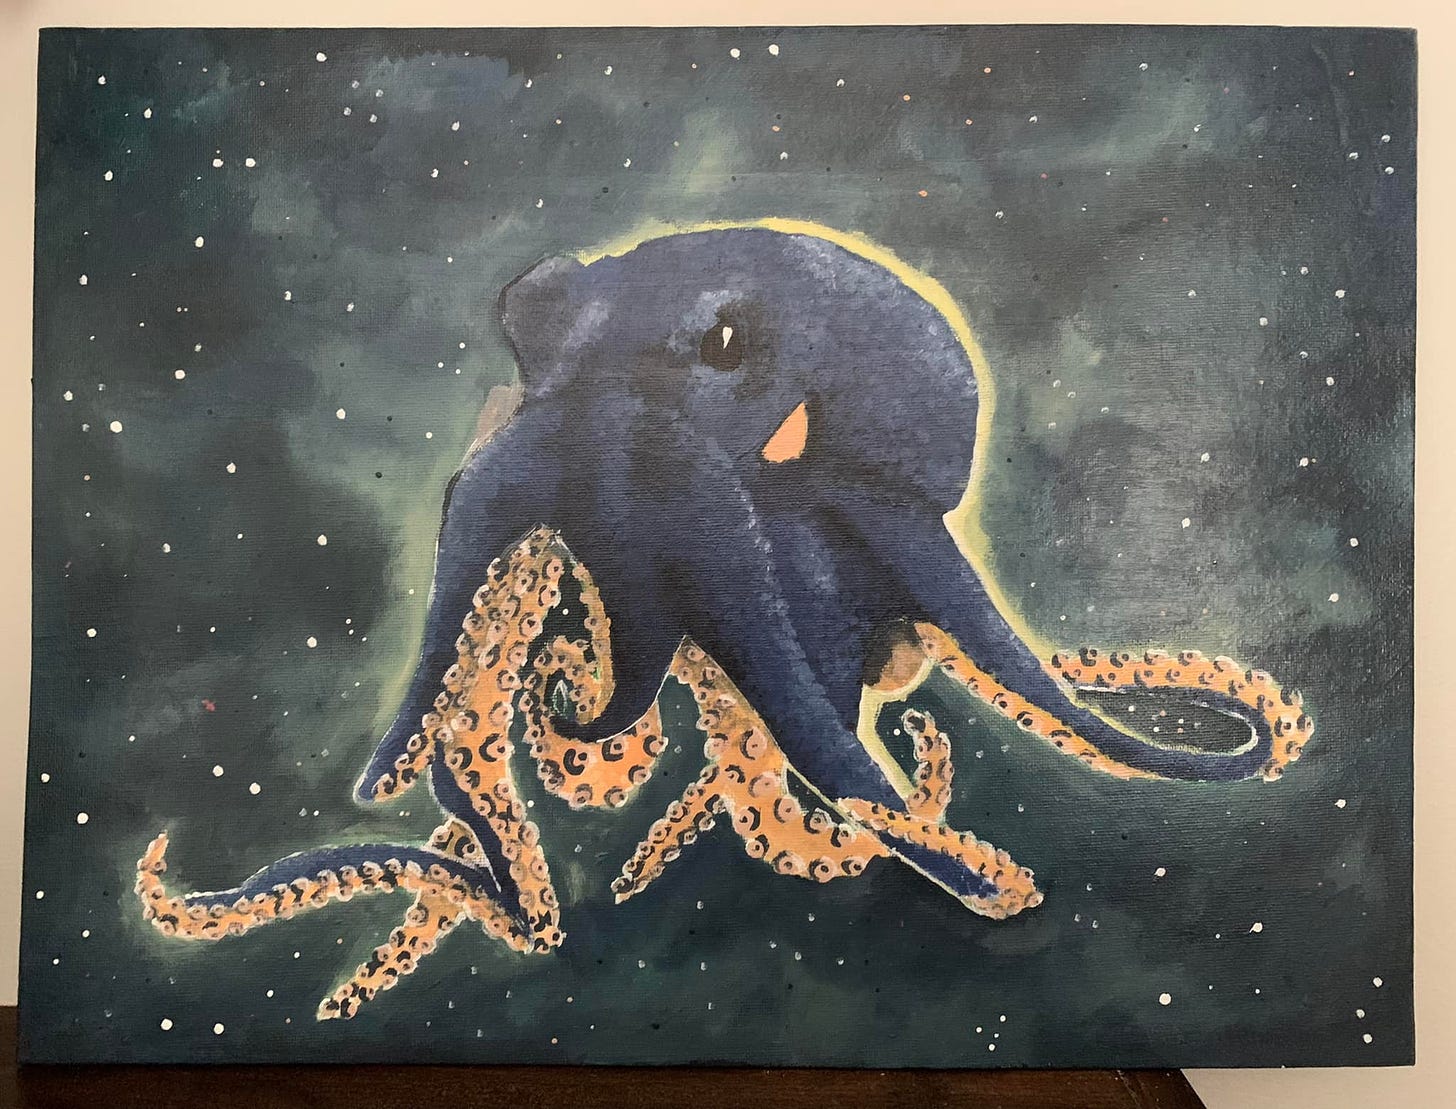 Acrylic painting of a dark blue octopus in outer space.